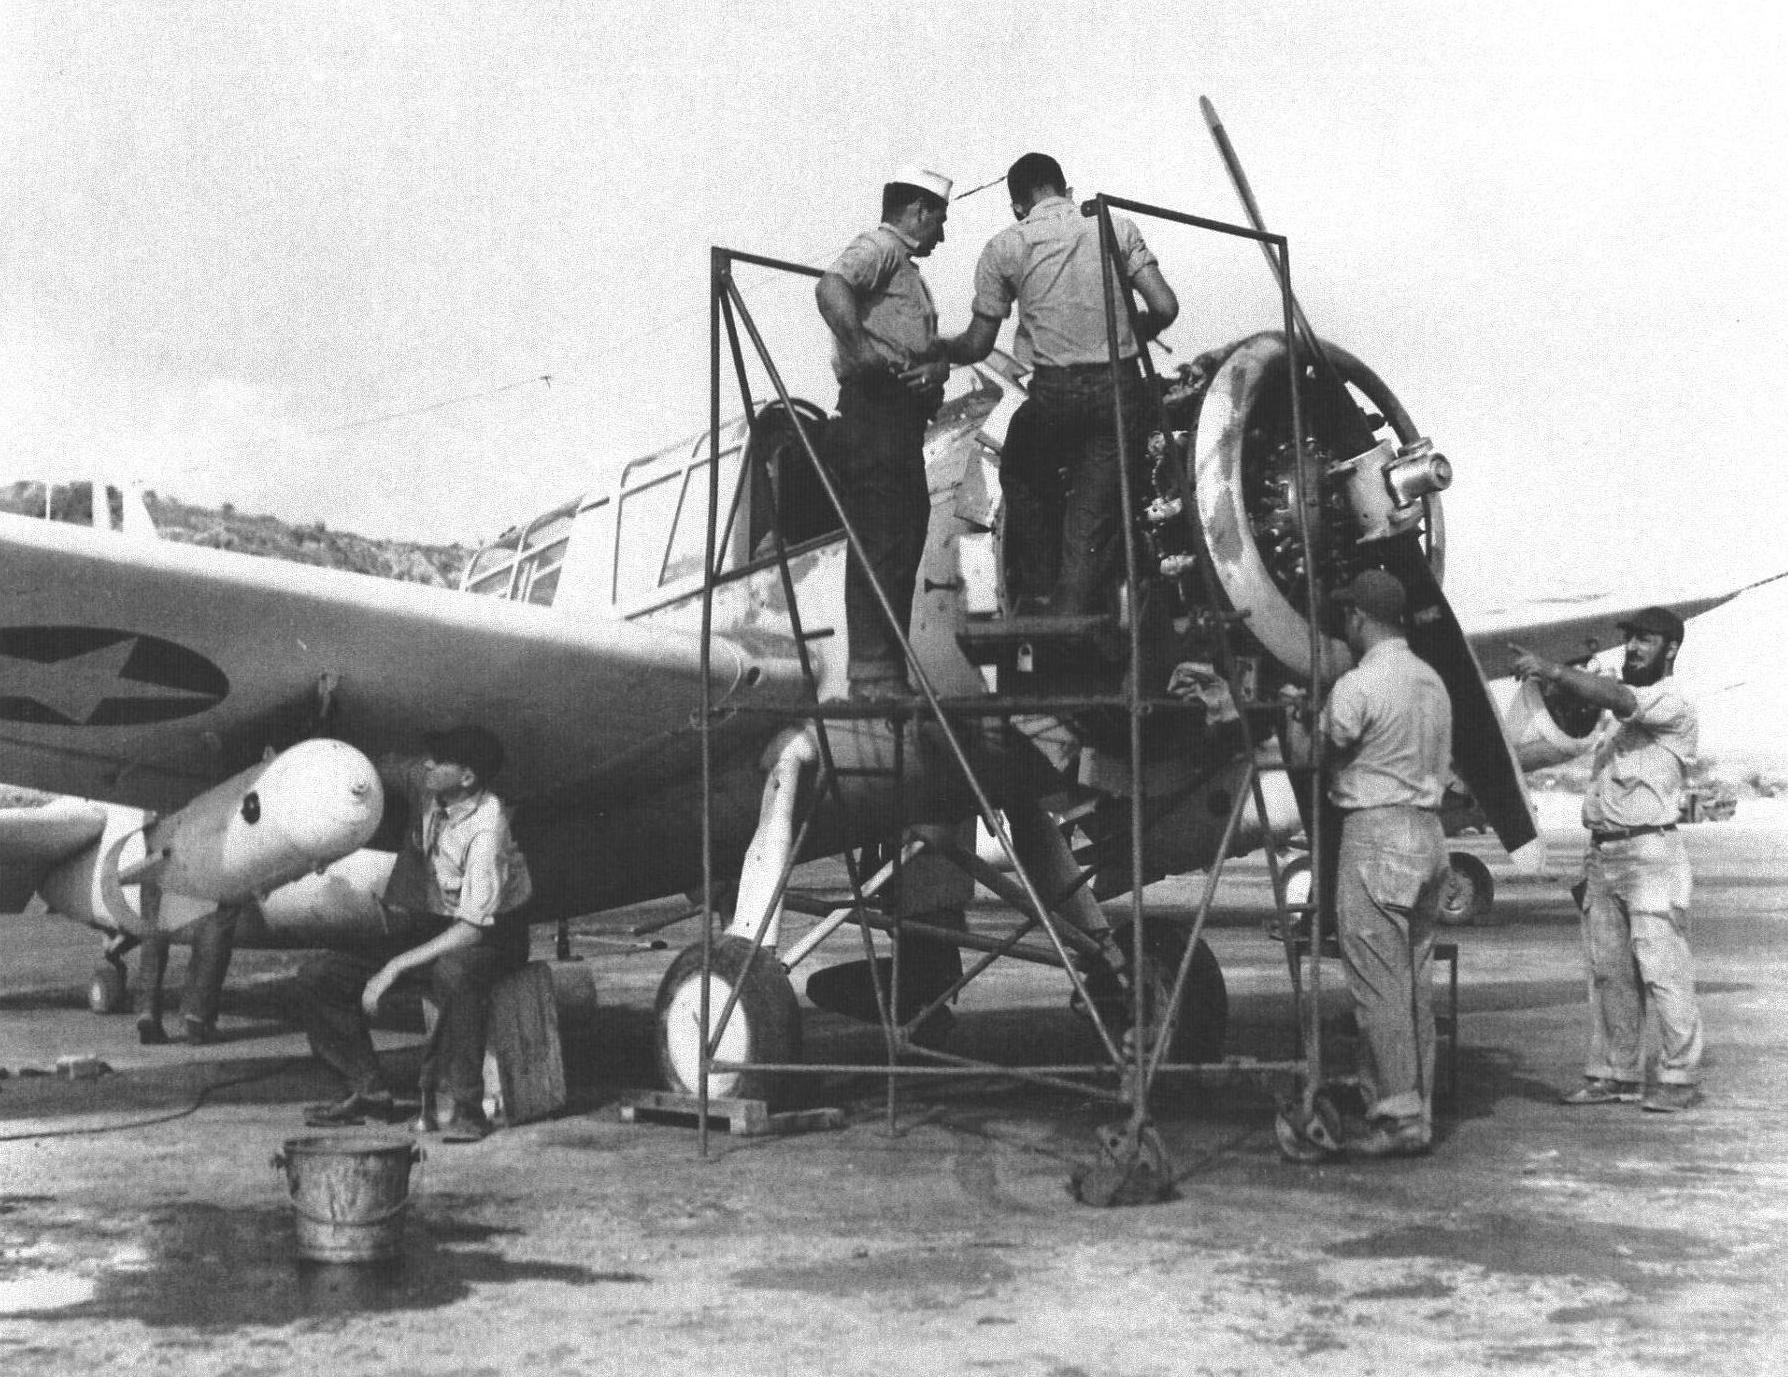 US Navy Scouting Squadron 44 (VS-44) maintenance crew working on a land-variant OS2U Kingfisher aircraft, Hato Field, Curaçao, Dutch West Indies, circa early to mid 1943